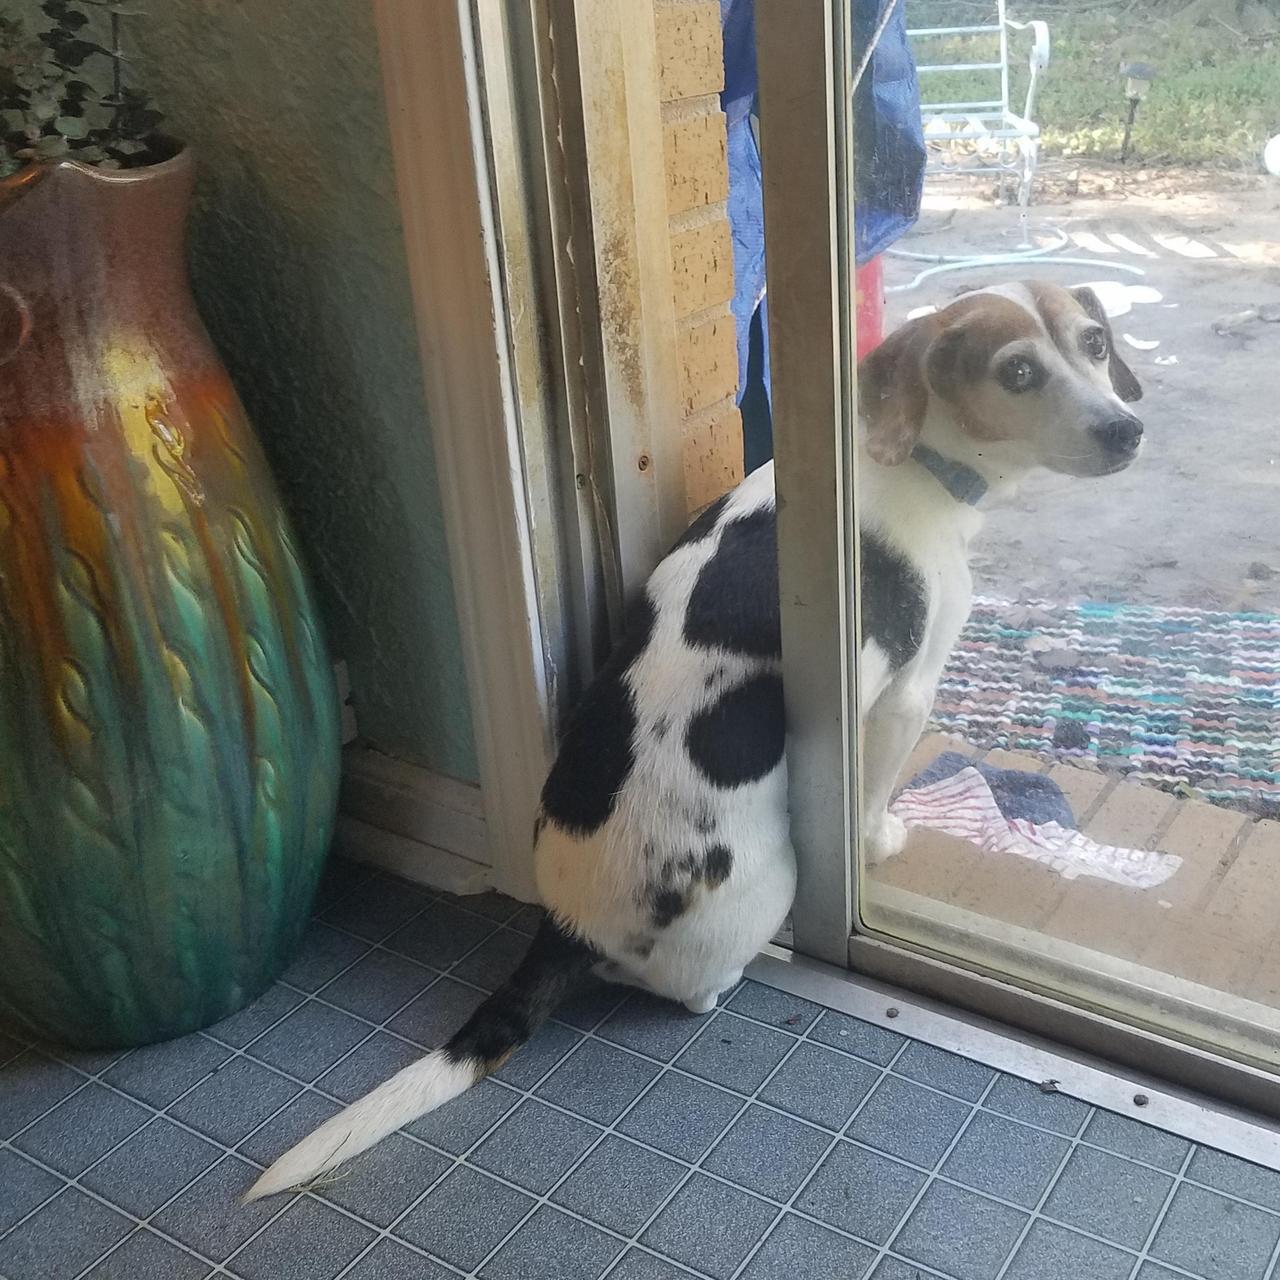 If she goes outside we shut the door and she hates it. So she keeps her butt inside to prevent this while she birdwatches. Meet Sofie. (Source: https://ift.tt/2OU4MAC)